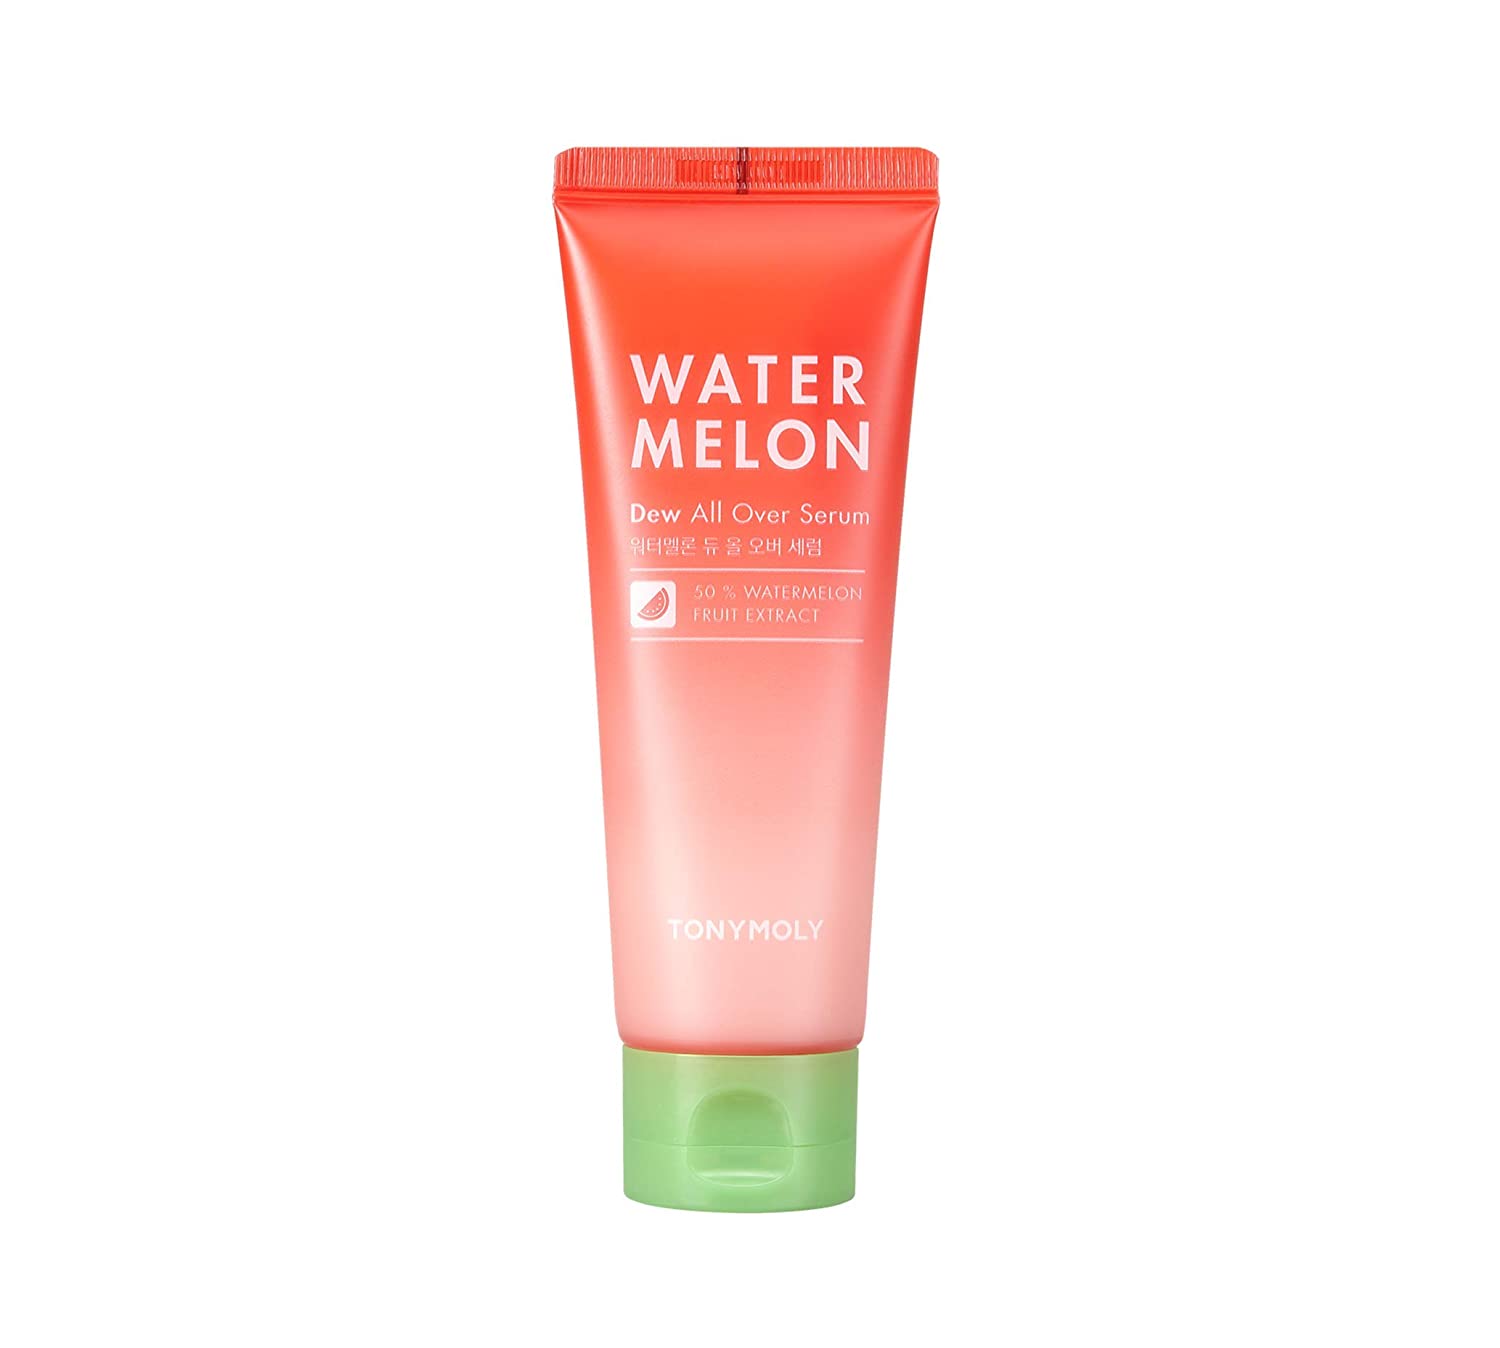 7 Watermelon-Infused Products You Need To Refresh Your Skin This Summer